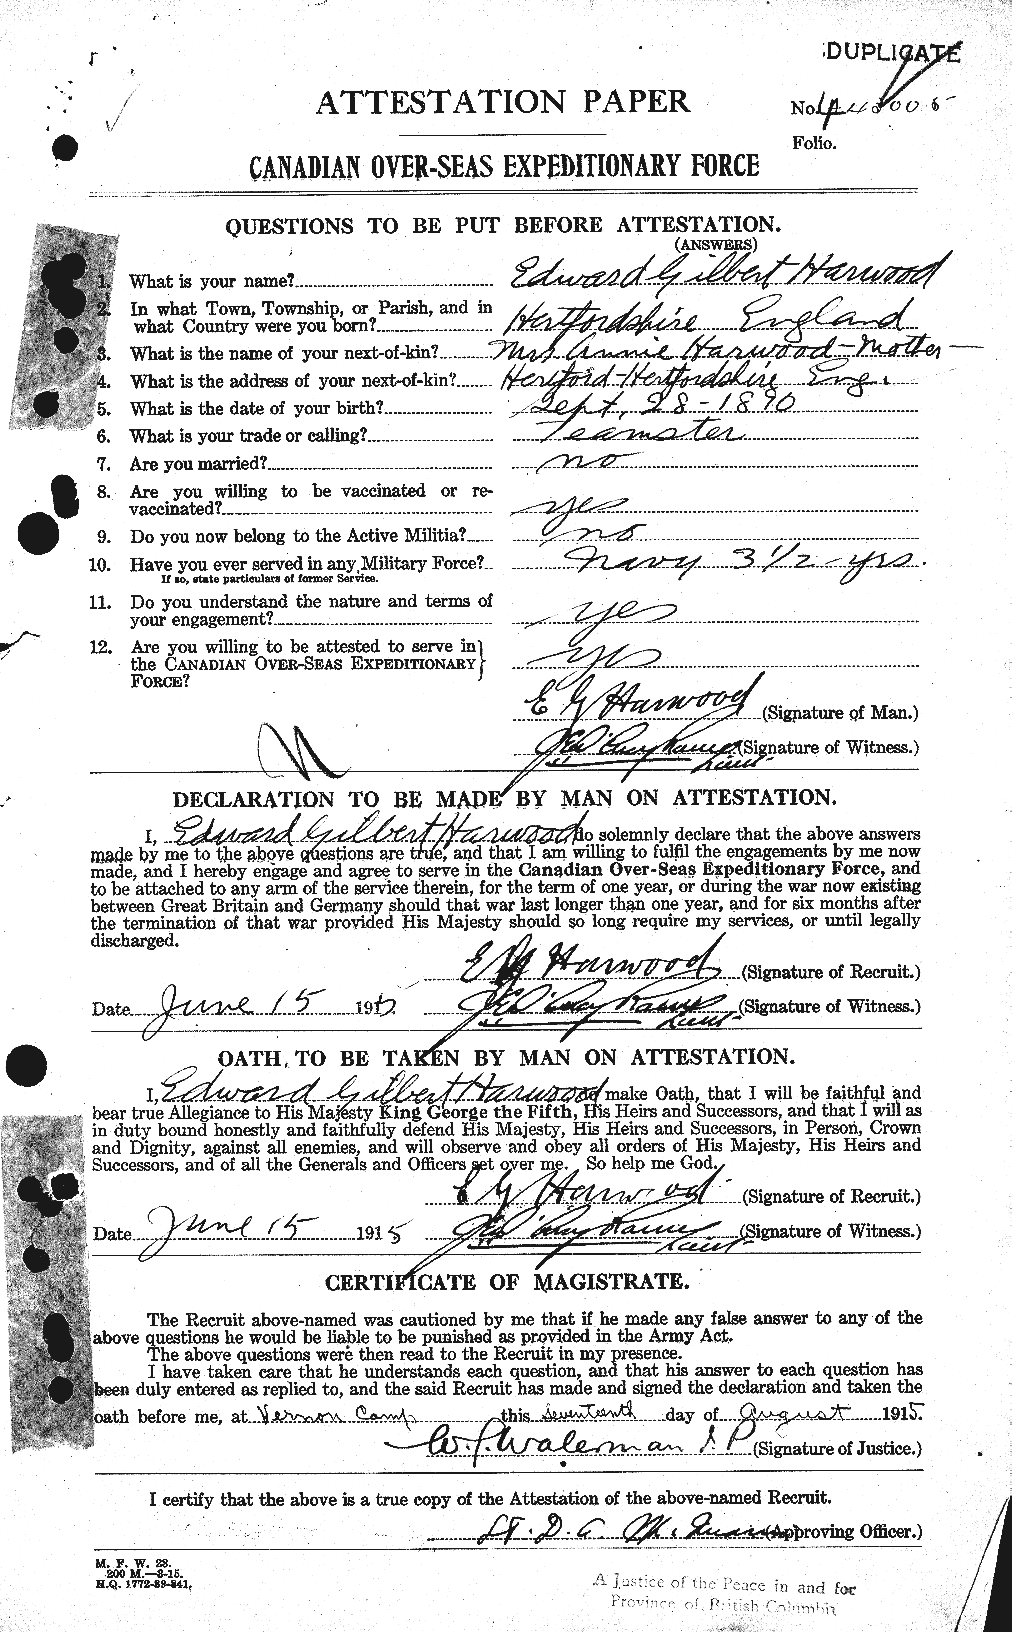 Personnel Records of the First World War - CEF 382323a